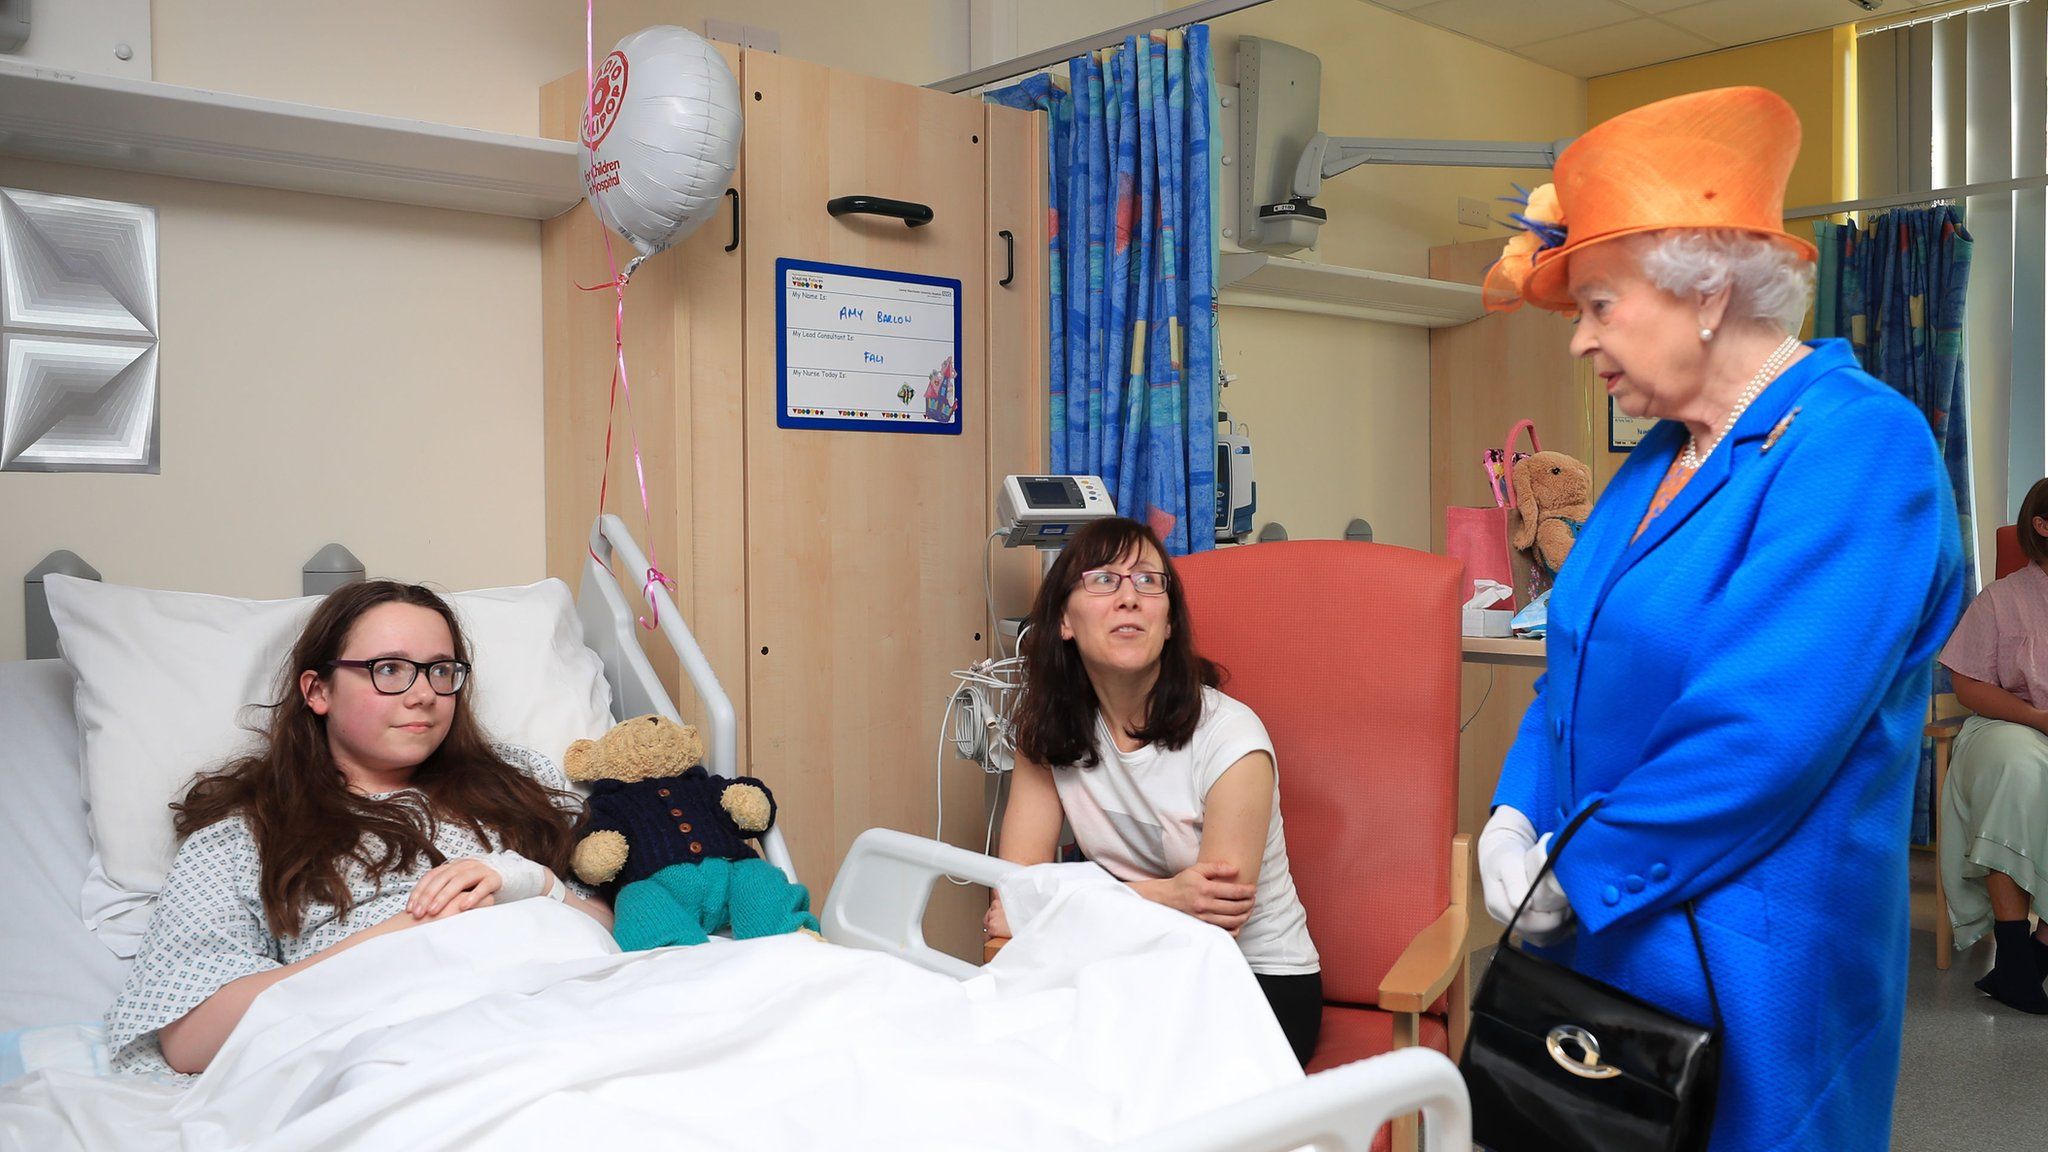 Amy Barlow, 12, with the Queen at the Royal Manchester Children's Hospital